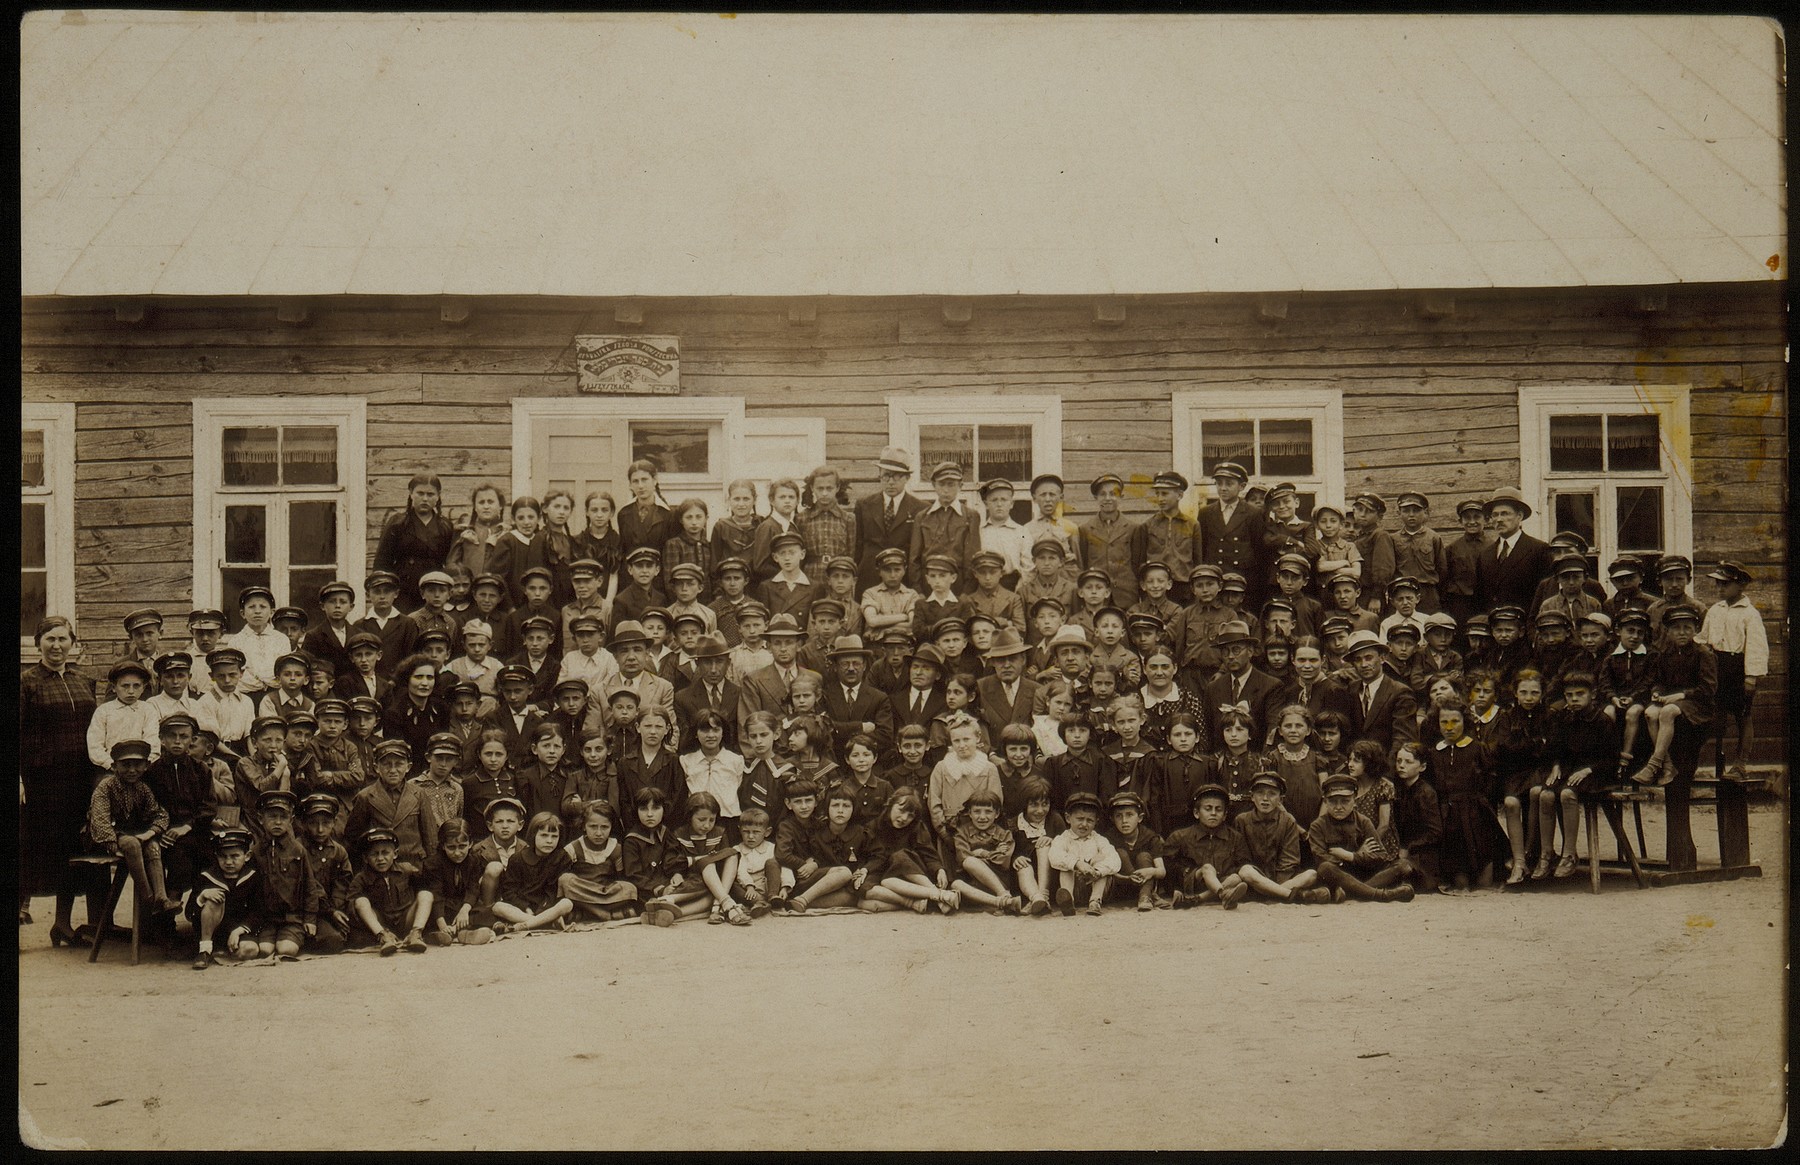 Students and faculty of the Eisiskes Hebrew school pose for a group portrait with members of the Education Committee in honor of Philip Shlanski's visit from America and his contribution to the school.

Sitting among the adults (fourth from right) Miriam Kaganowicz. The teacher standing at the far right is Shaul Michalowski. The teacher in the back row is Okun. Top row far right is Shaul Lidski, (7th from right) Liebke Kaganowicz, (9th from right)  Avigdor Katz, (10th from right) Zelig Ballon.  Second row from top, from left to right: 9th boy: Moshke Dubachnky, 6th  boy: Moshe Edelstin, 14th boy: Moshe Baskunski, 17th boy: Elisha Koppelman and 24th boy Reuvan Piakowski.  Third row from bottom from left to right: Alte Katz, President of Education Committee, 3rd boy: Benyamin (Niomke) Sonenson, Meir Rosenbloom, a member of the Education Committee sitting to the right of light-suited man and to his right is Nachum Koppelman, a member of the Education Committee.  Man on her right is David Schwartz. At the far right is the teacher,Belsky.  

Except for Liebke Kaganowicz and Reuvan Piakowski, most of the others pictured perished during the Holocaust.